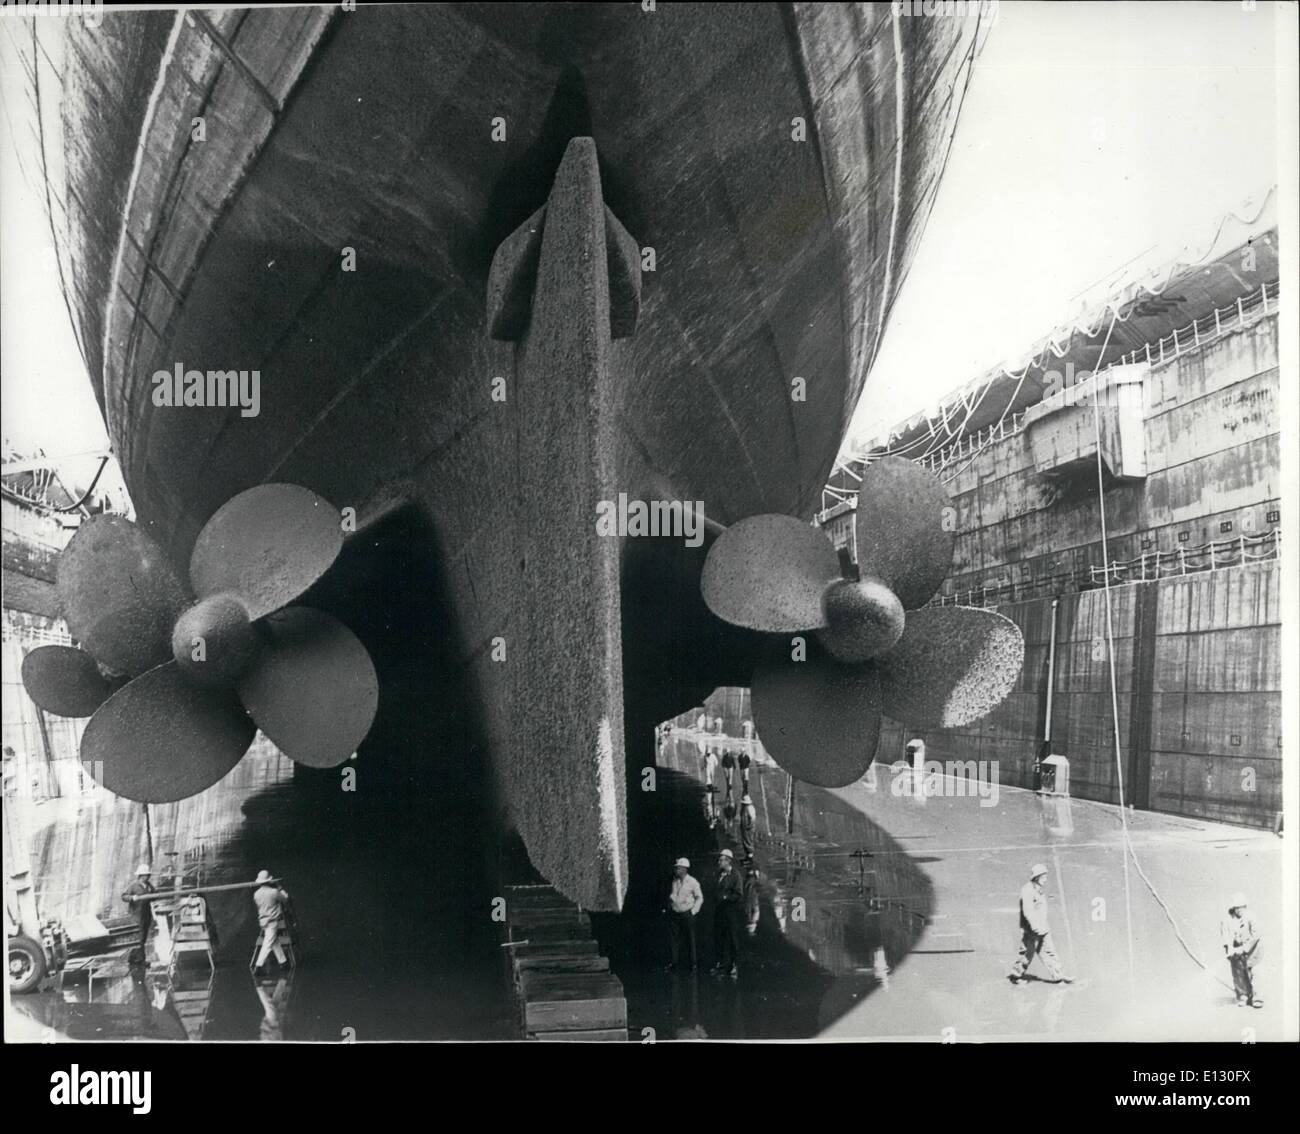 Feb. 26, 2012 - Queen Mary .. High and Dry.: The seagoing royal monarch R.M.S. Queen Mary rest proudly on blocks in the hugh Long Beach Naval Shipyard at drydock number one. During her six weeks on the ways, the Queen Mary will have threee of her four propellers removed, 94 openings in her hull closed, her bottom sandblasted and painted, various other conversion jobs attended to before returning to Pier E. in Long Beach, for final conversion to a multi-million dollar hotel-convention centre and maritime museum complex Stock Photo